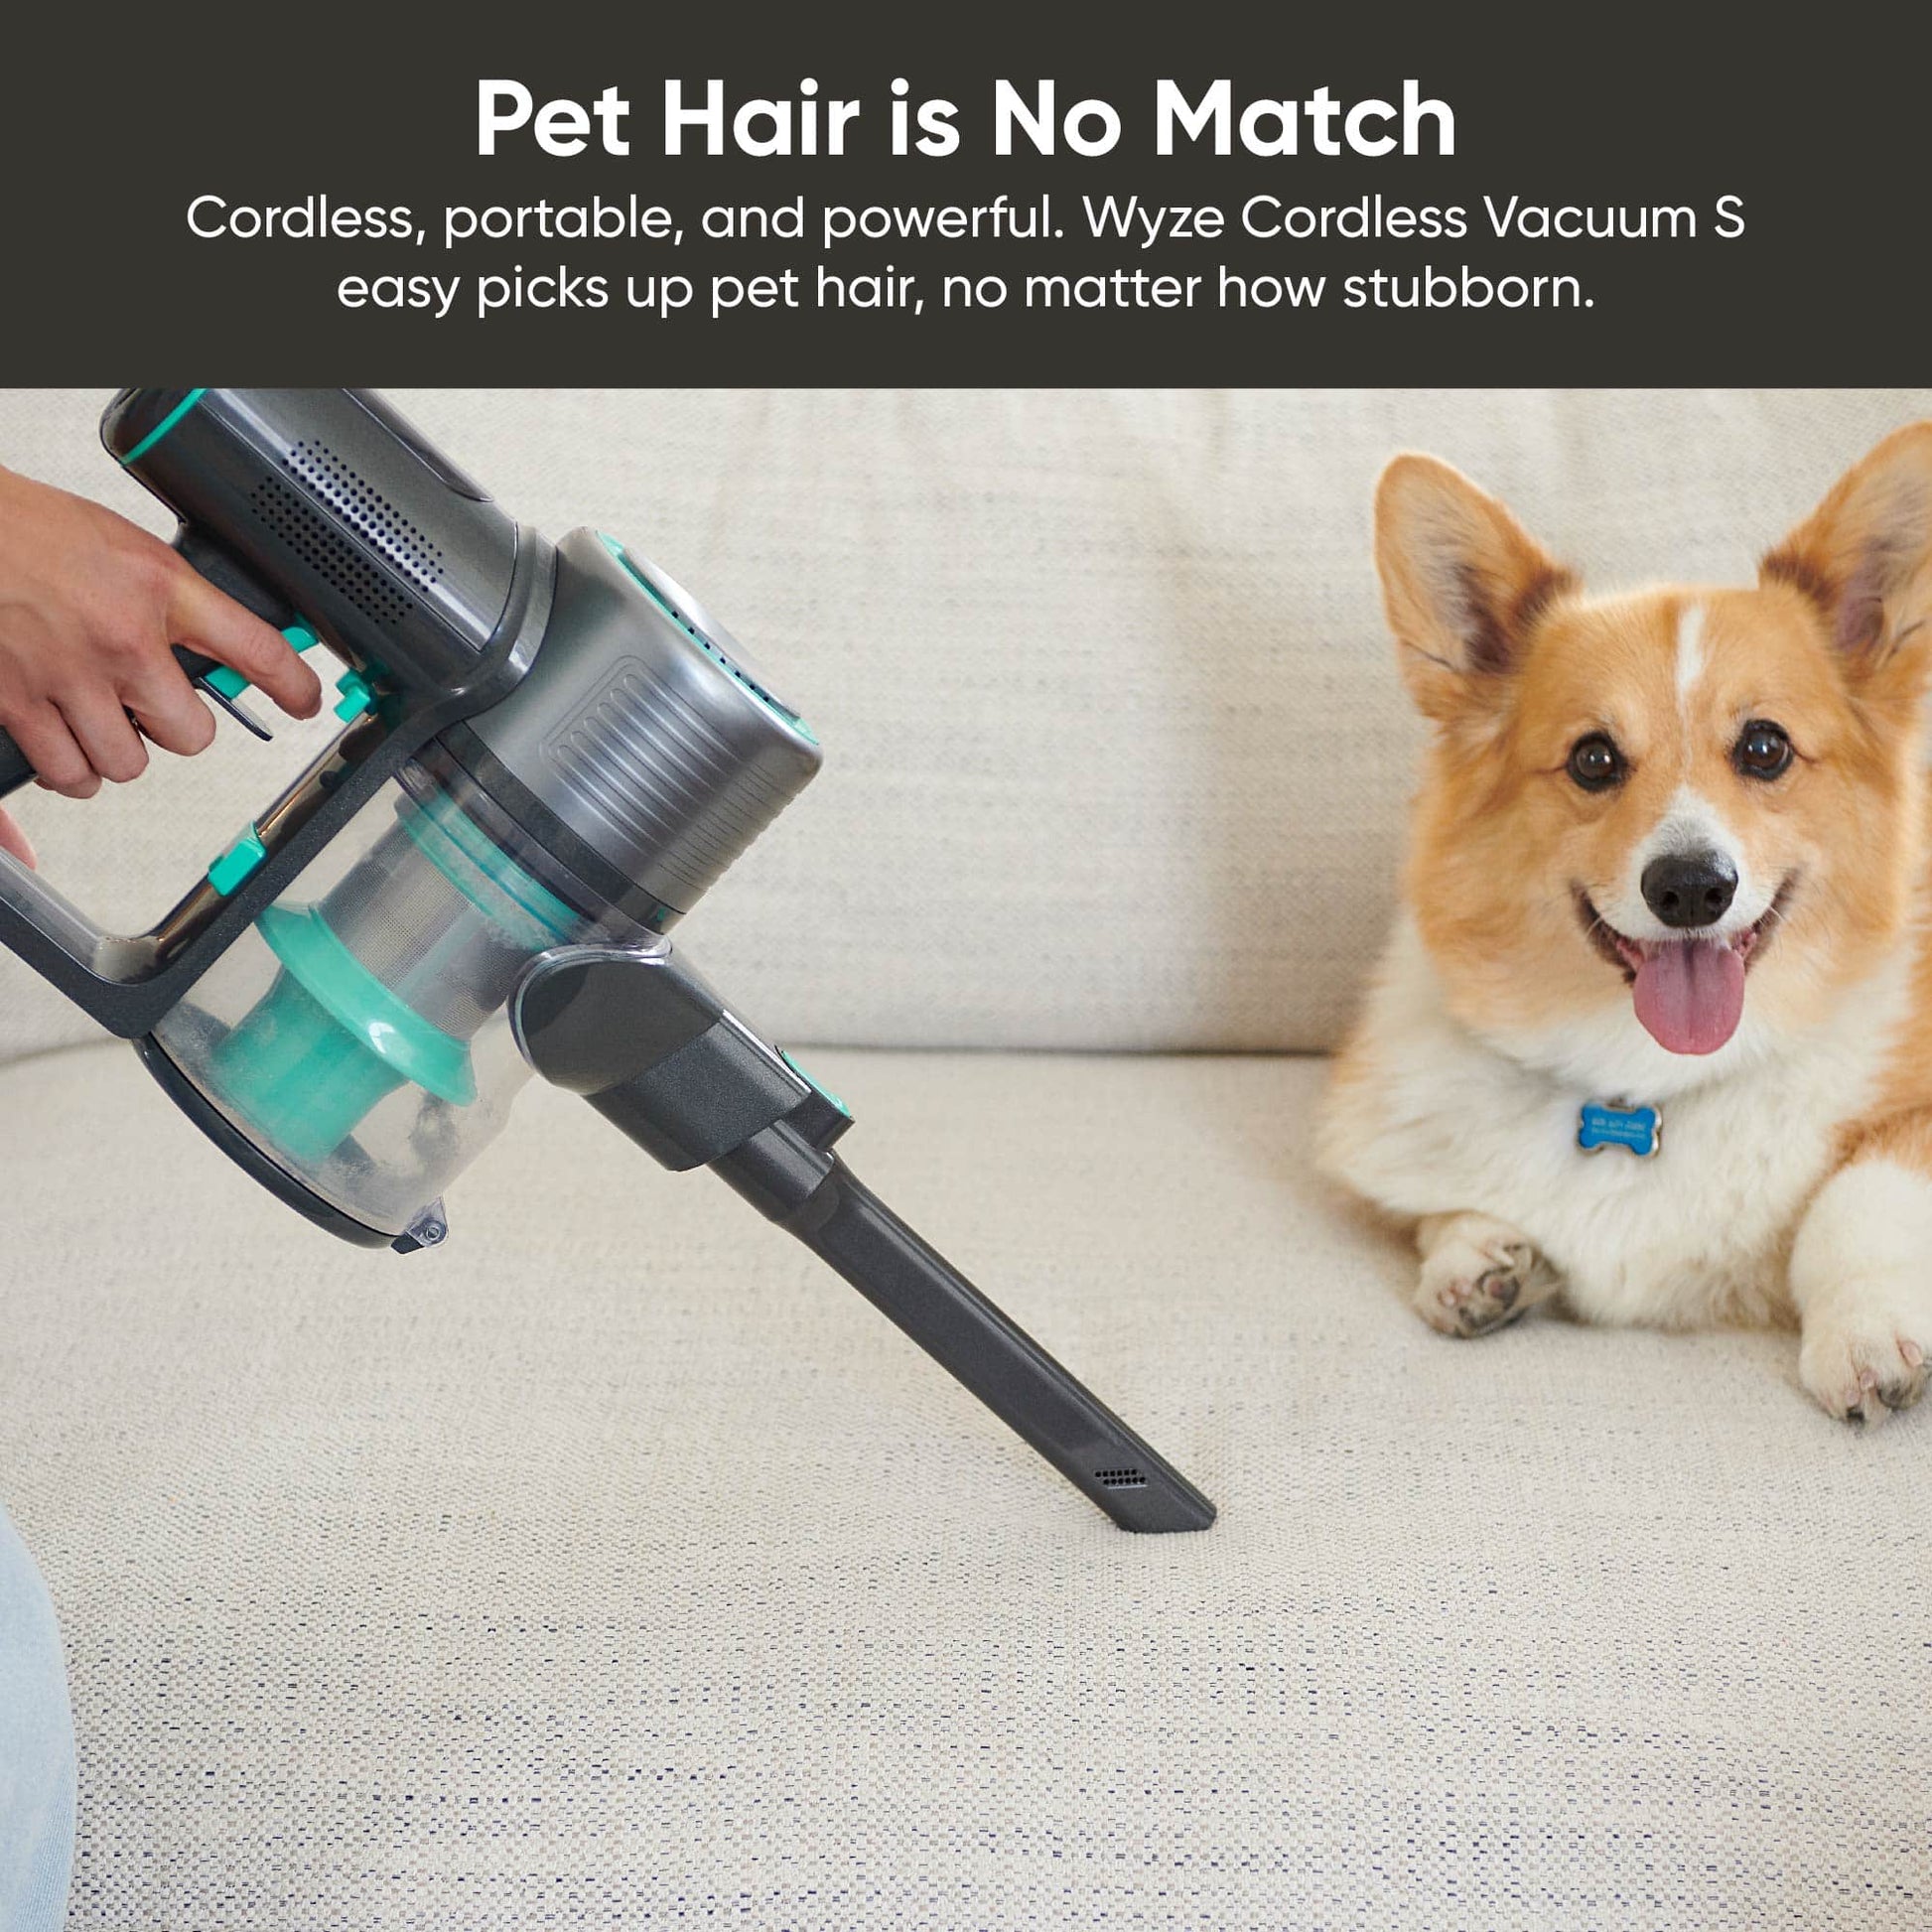 The Best Handheld Vacuum for Pet Hair Is on Sale for Under $100